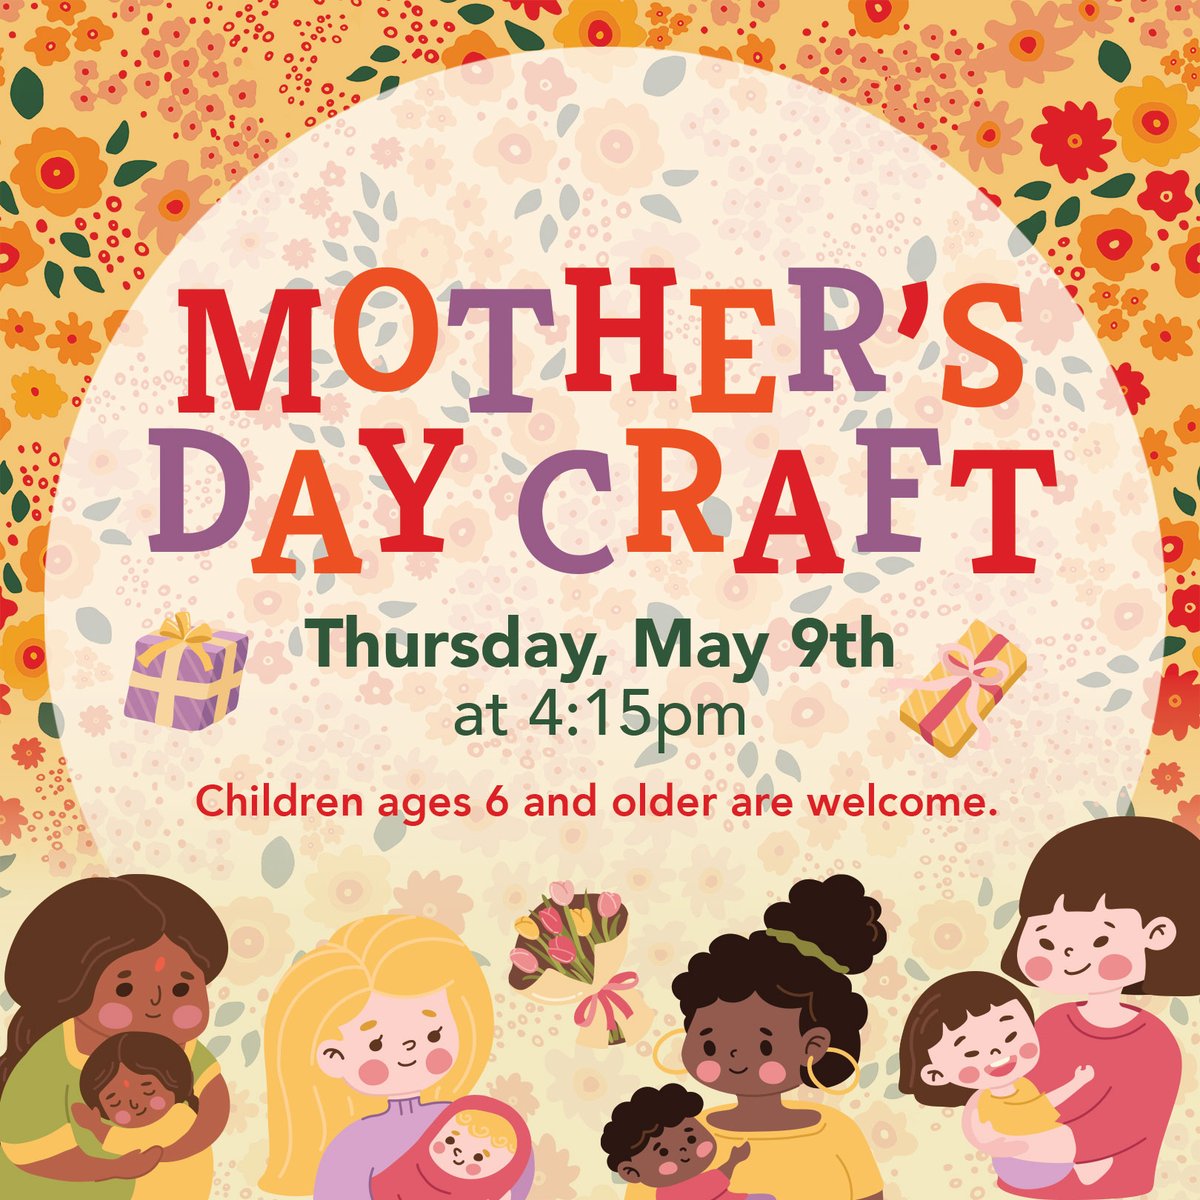 Join Miss Allyson and craft a Mother’s Day project just in time for this special holiday. Space is limited to the ﬁrst 12 participants.

Visit our website to register.

#mothersday #mothersdaycraft #childrenscrafts #hhﬂ  #librariesrock